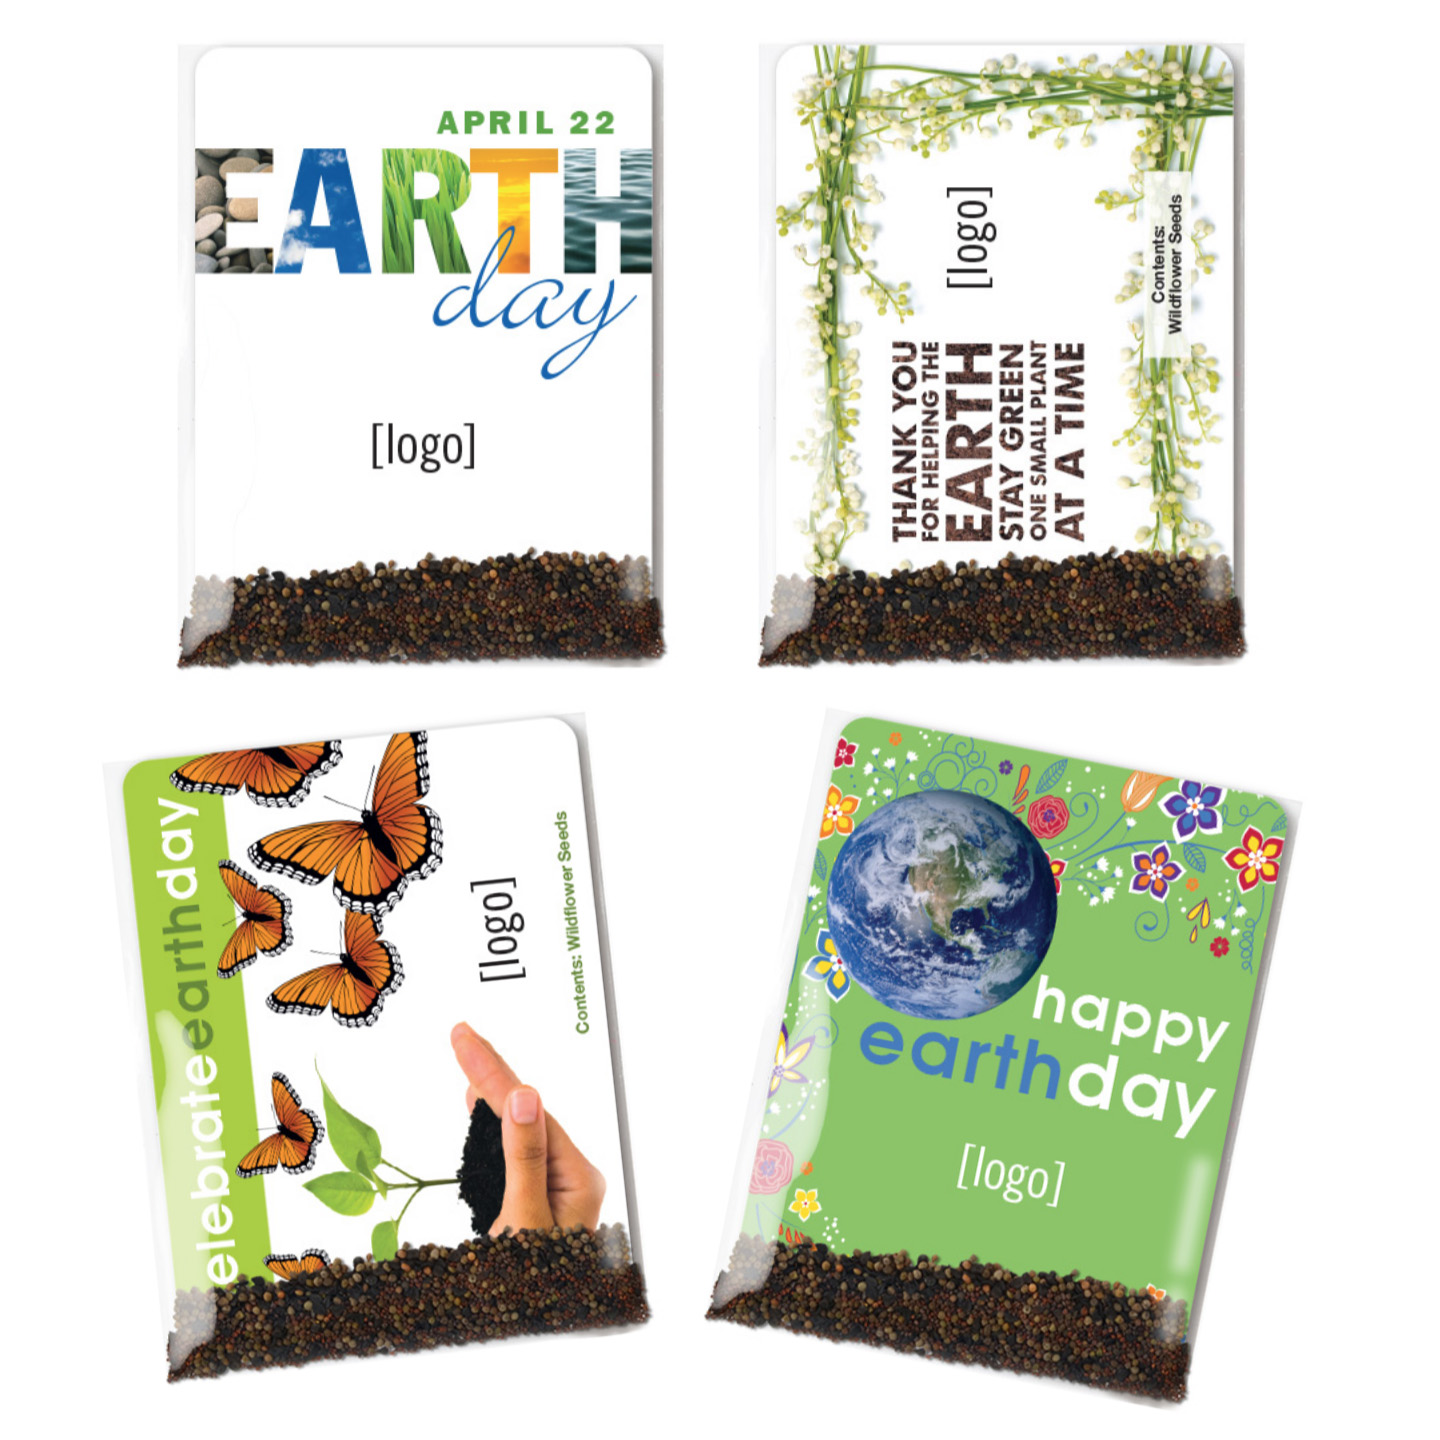 USA Made Earth Day Pollinator Seed Packets | Recycled Promotional Product